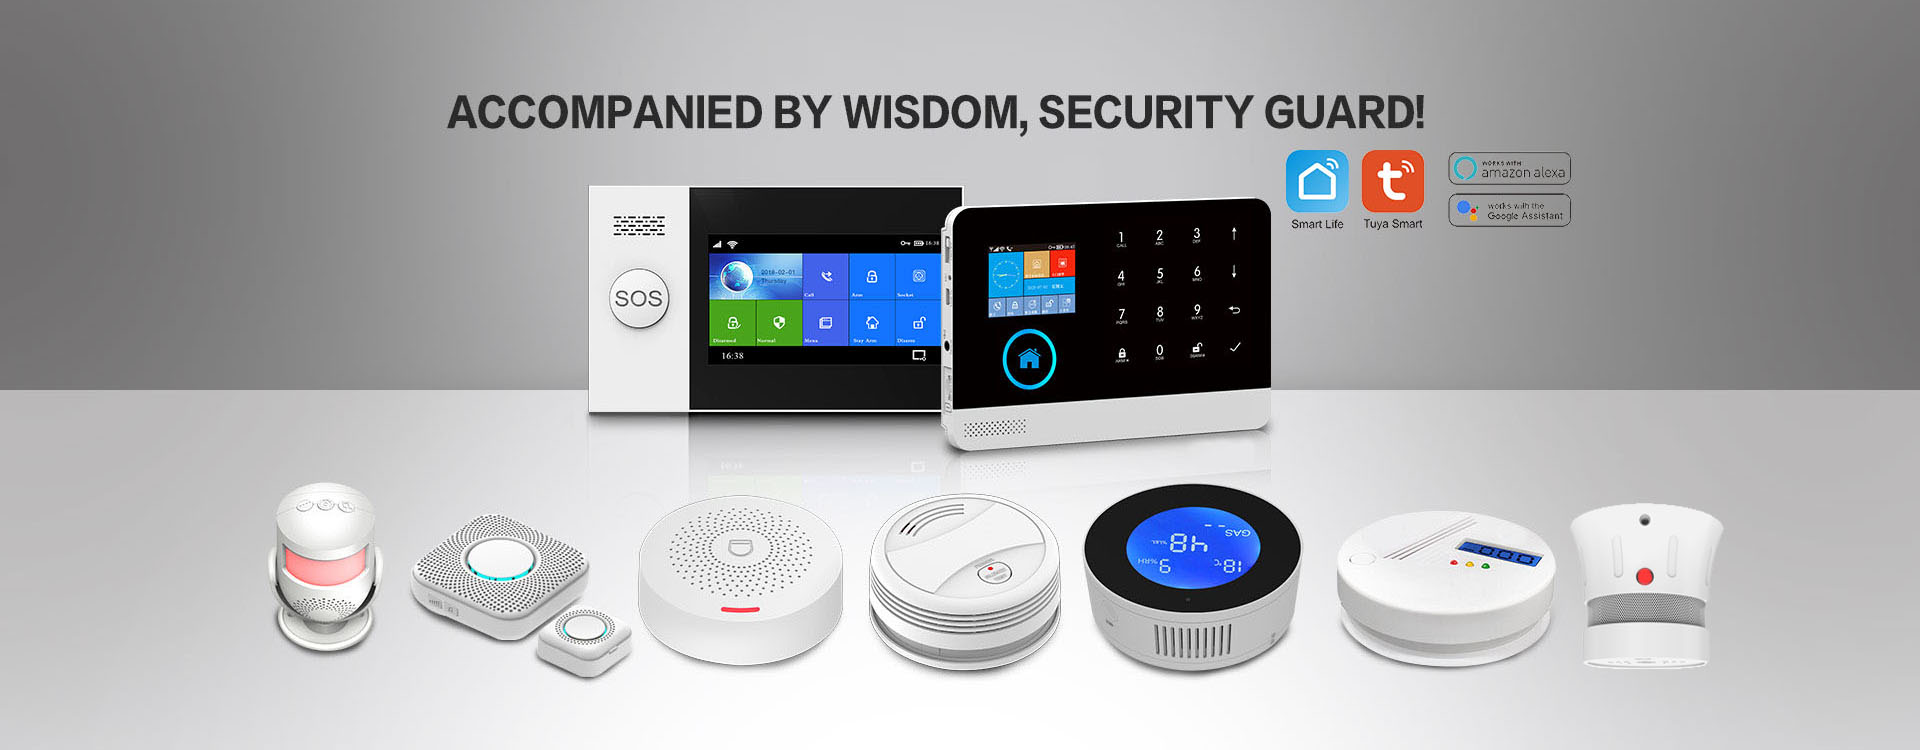 Smart home Alarm system security